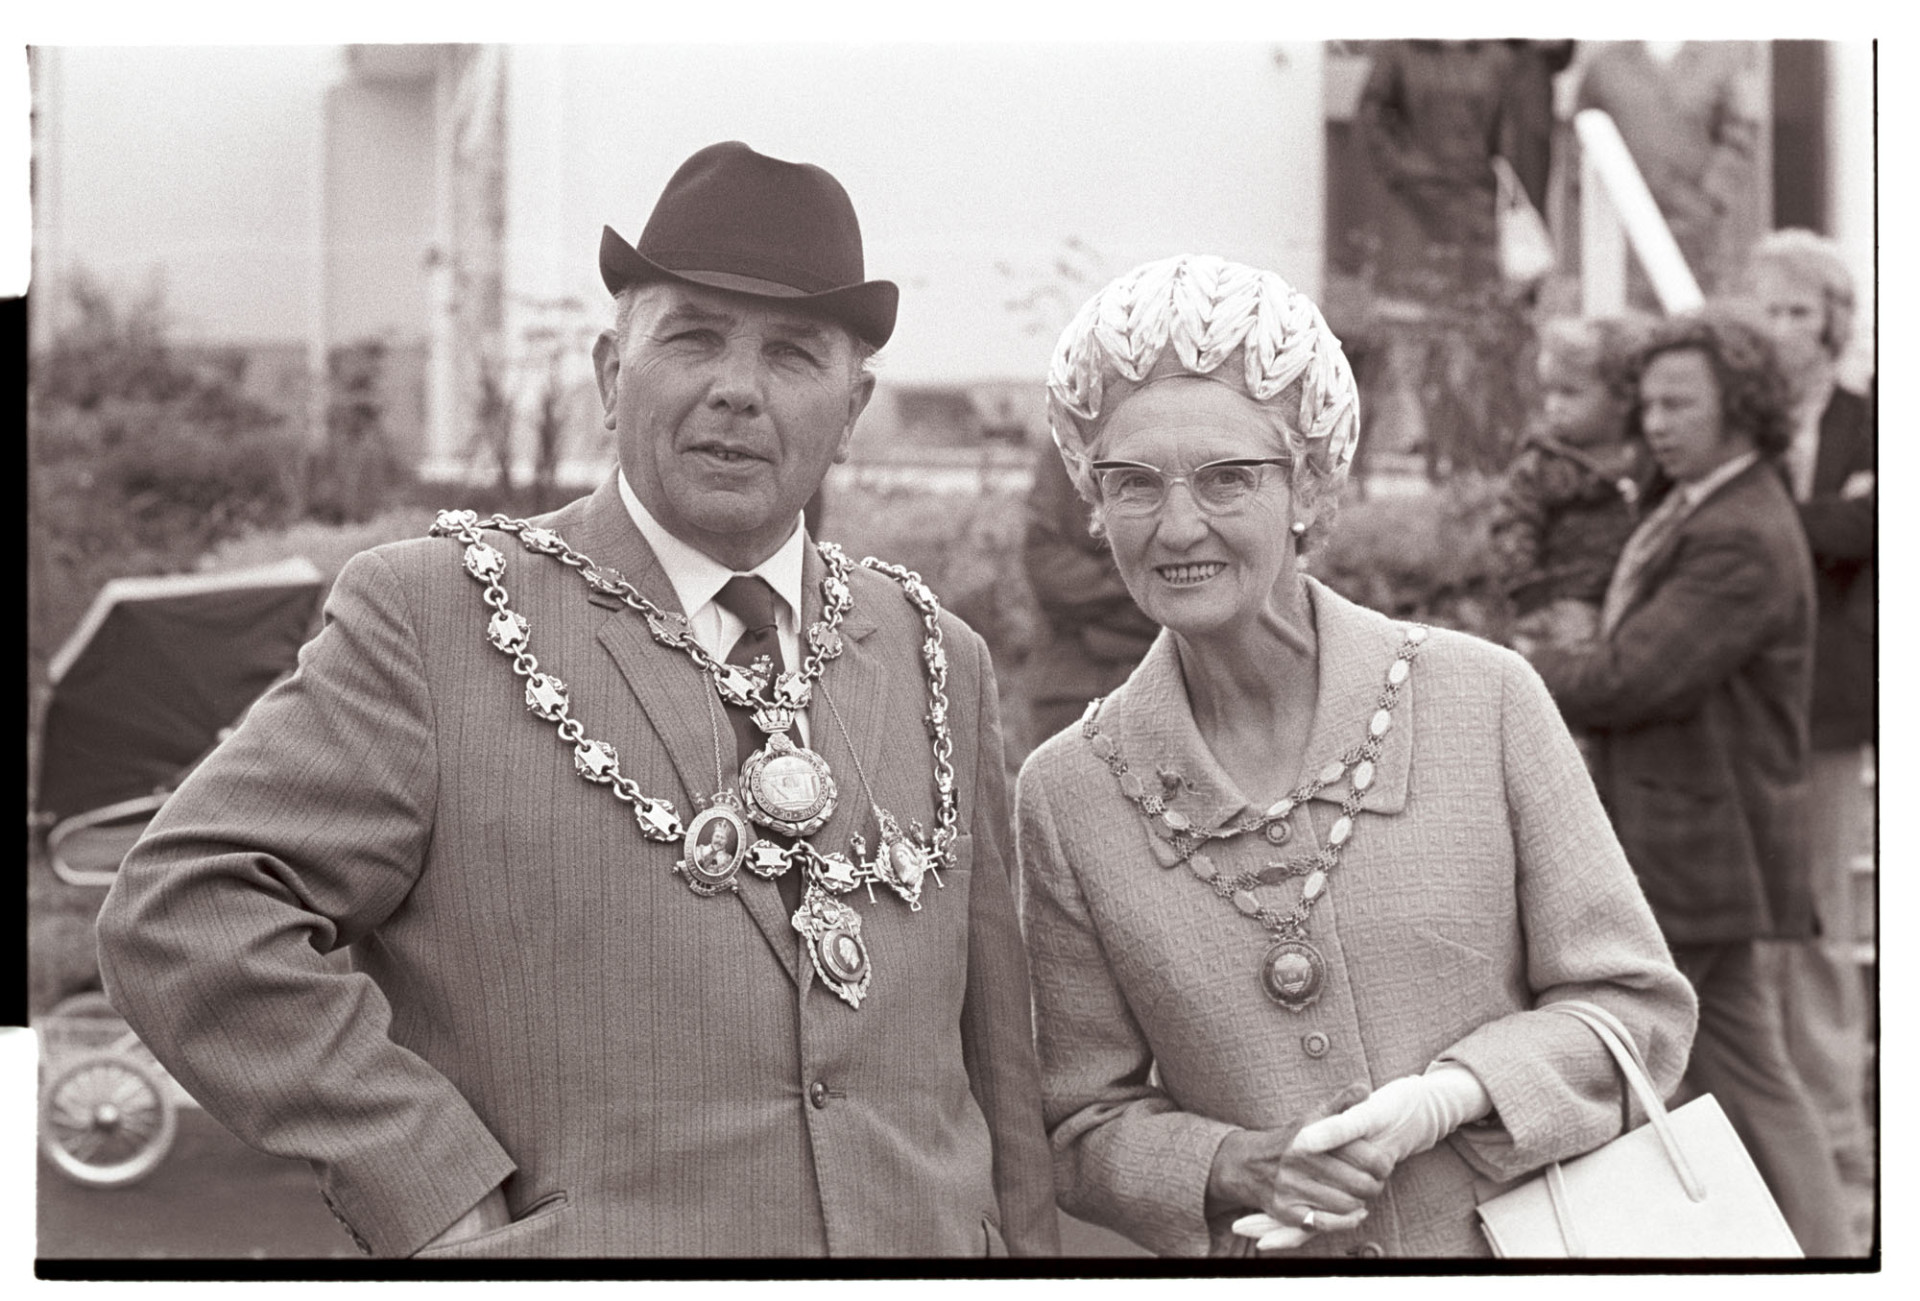 Mayor and Mayoress.
[The Bideford Mayor and Mayoress at Bideford carnival, wearing their chains of office.]